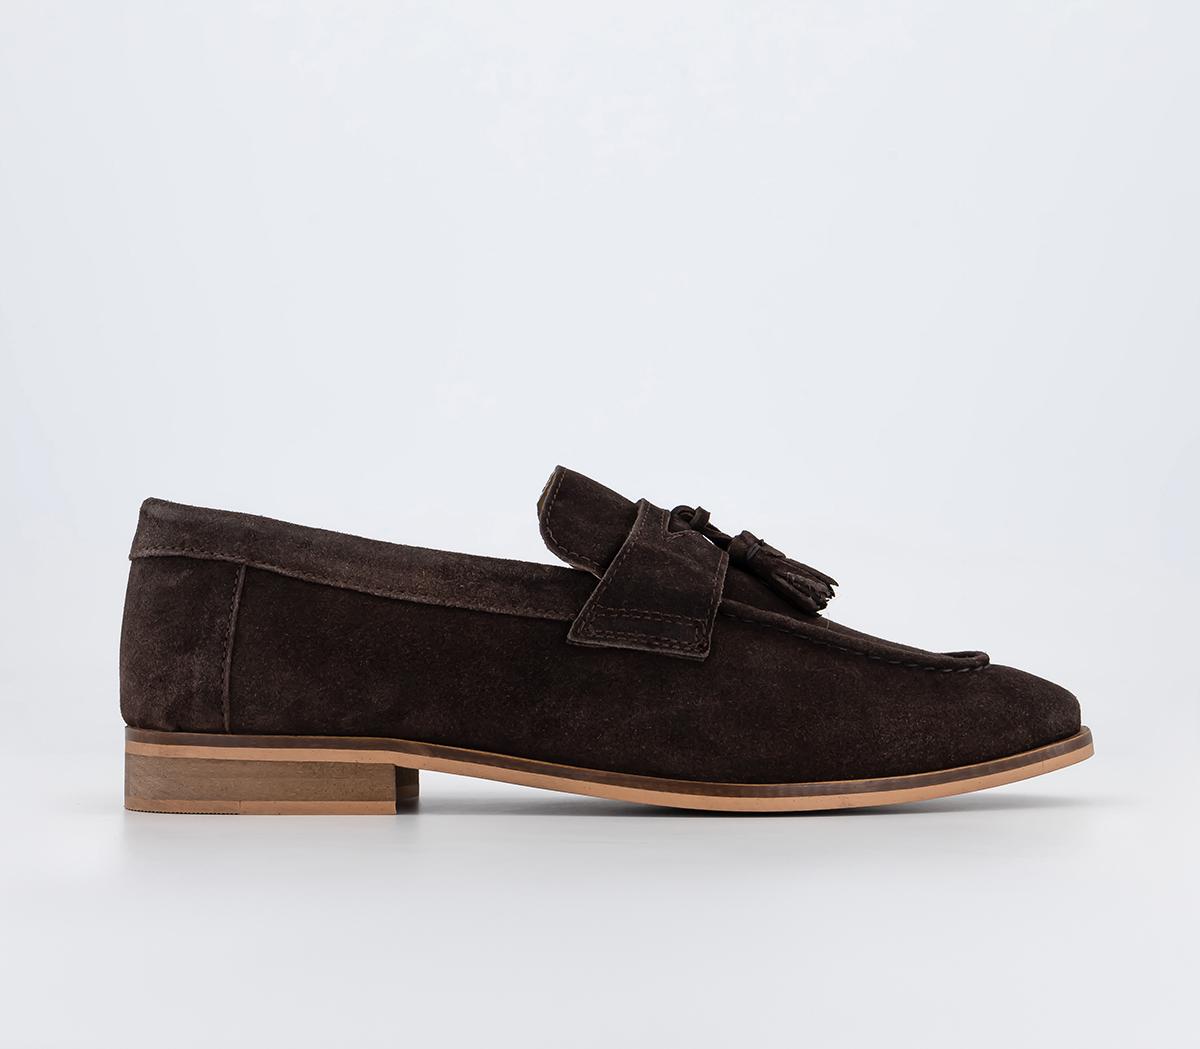 OFFICEWide Fit Channing Tassel LoafersBrown Suede